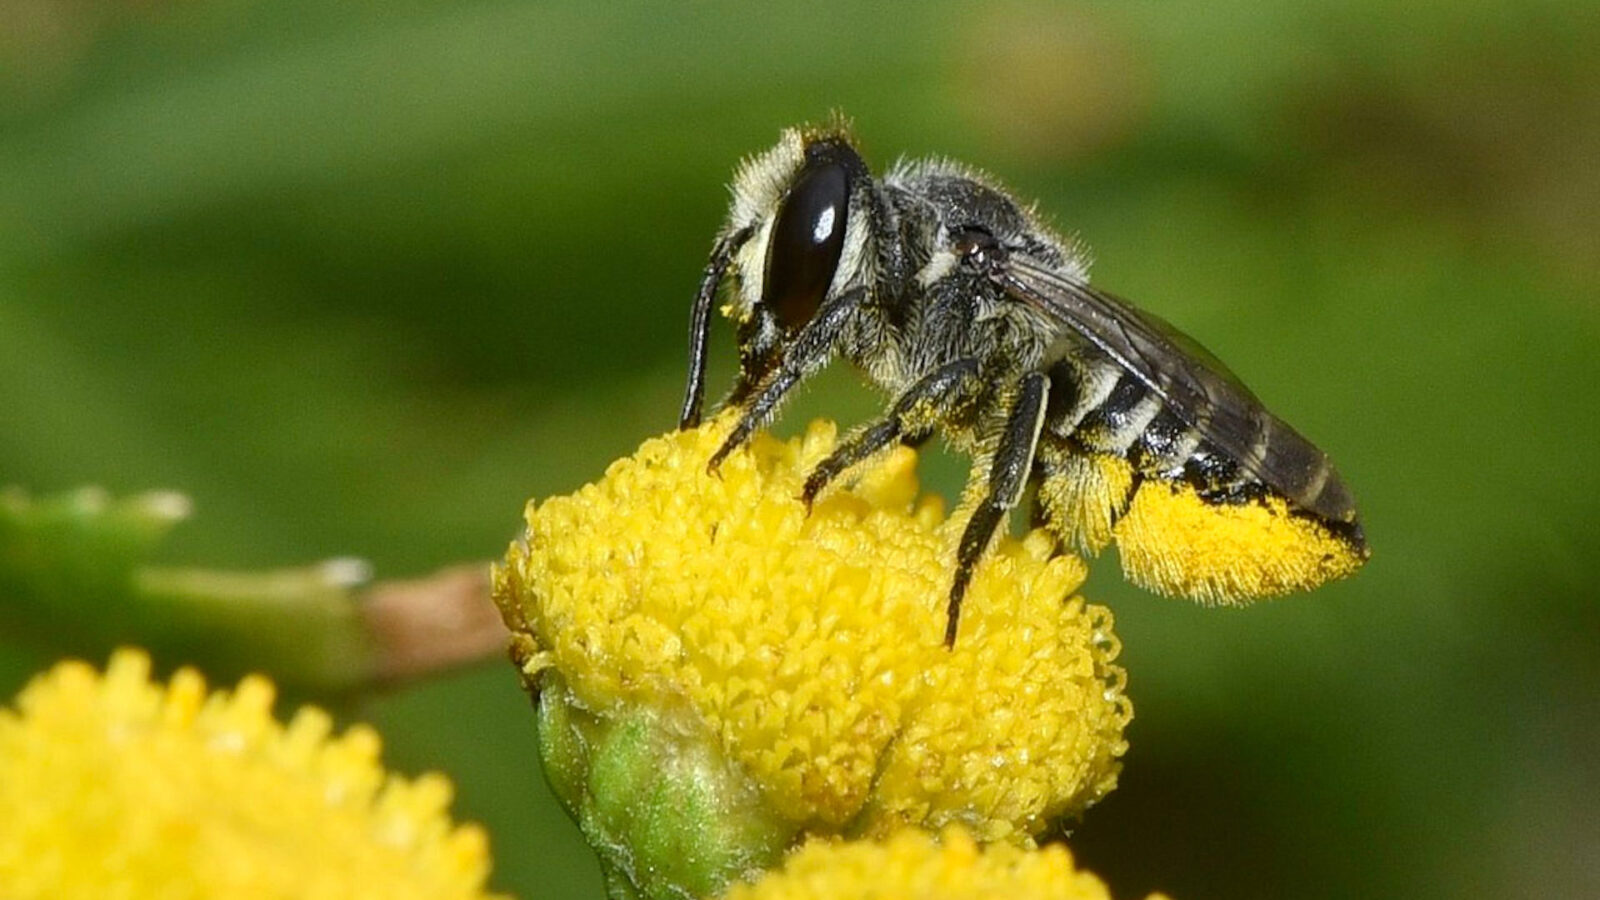 Leaf cutter bees play key role for Arizona cash crop